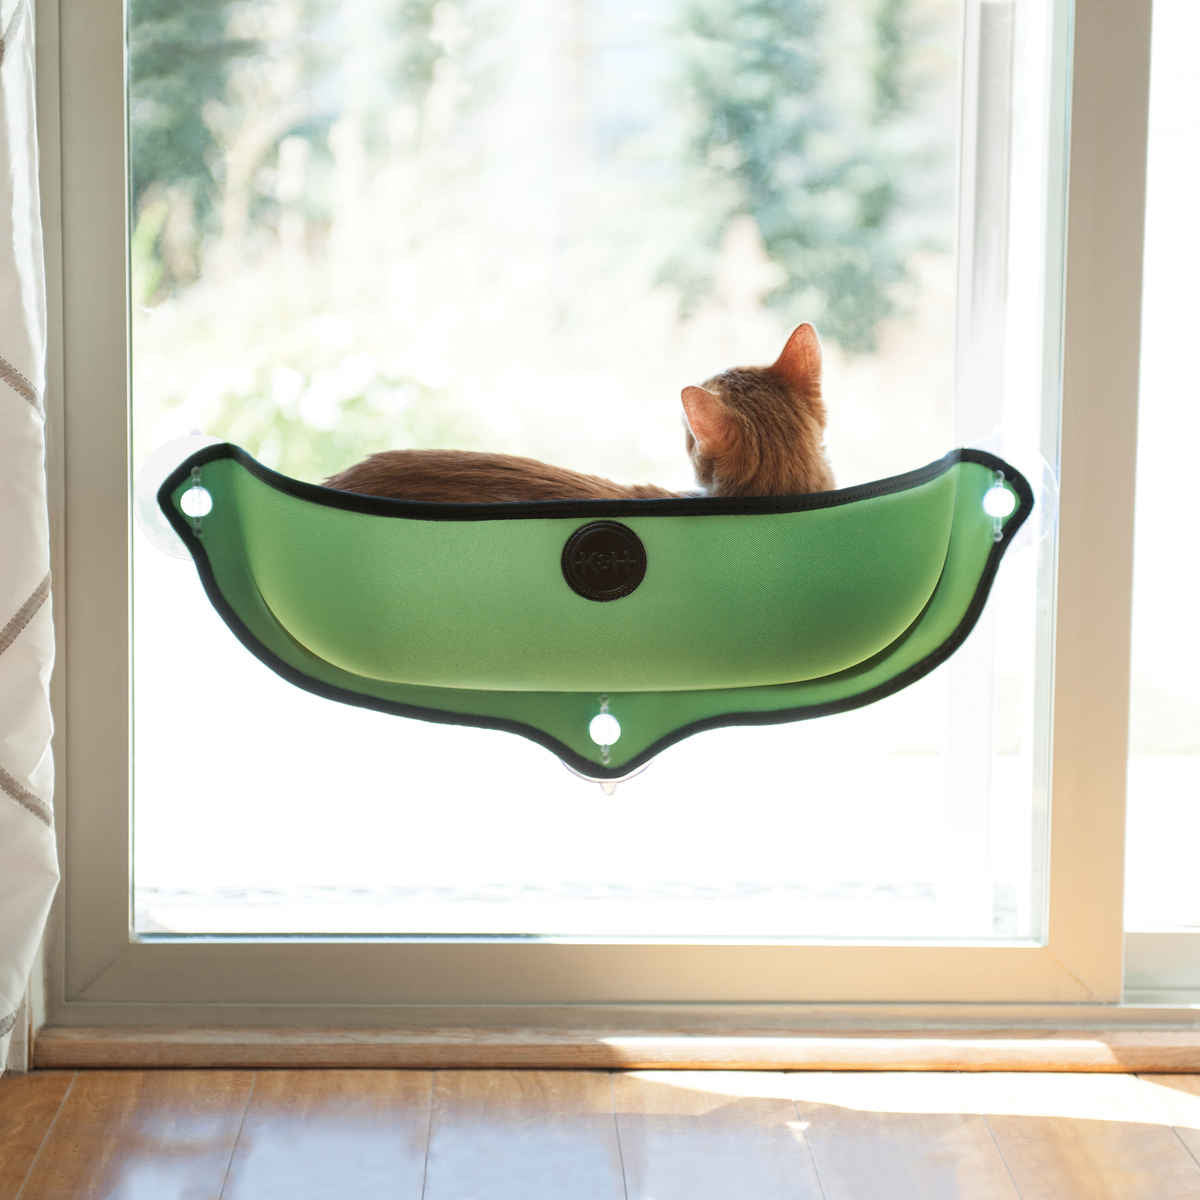 K&H Pet Products EZ Mount Window Bed Kitty Sill Green 27″ x 11″ x 10.5″ – KH9192